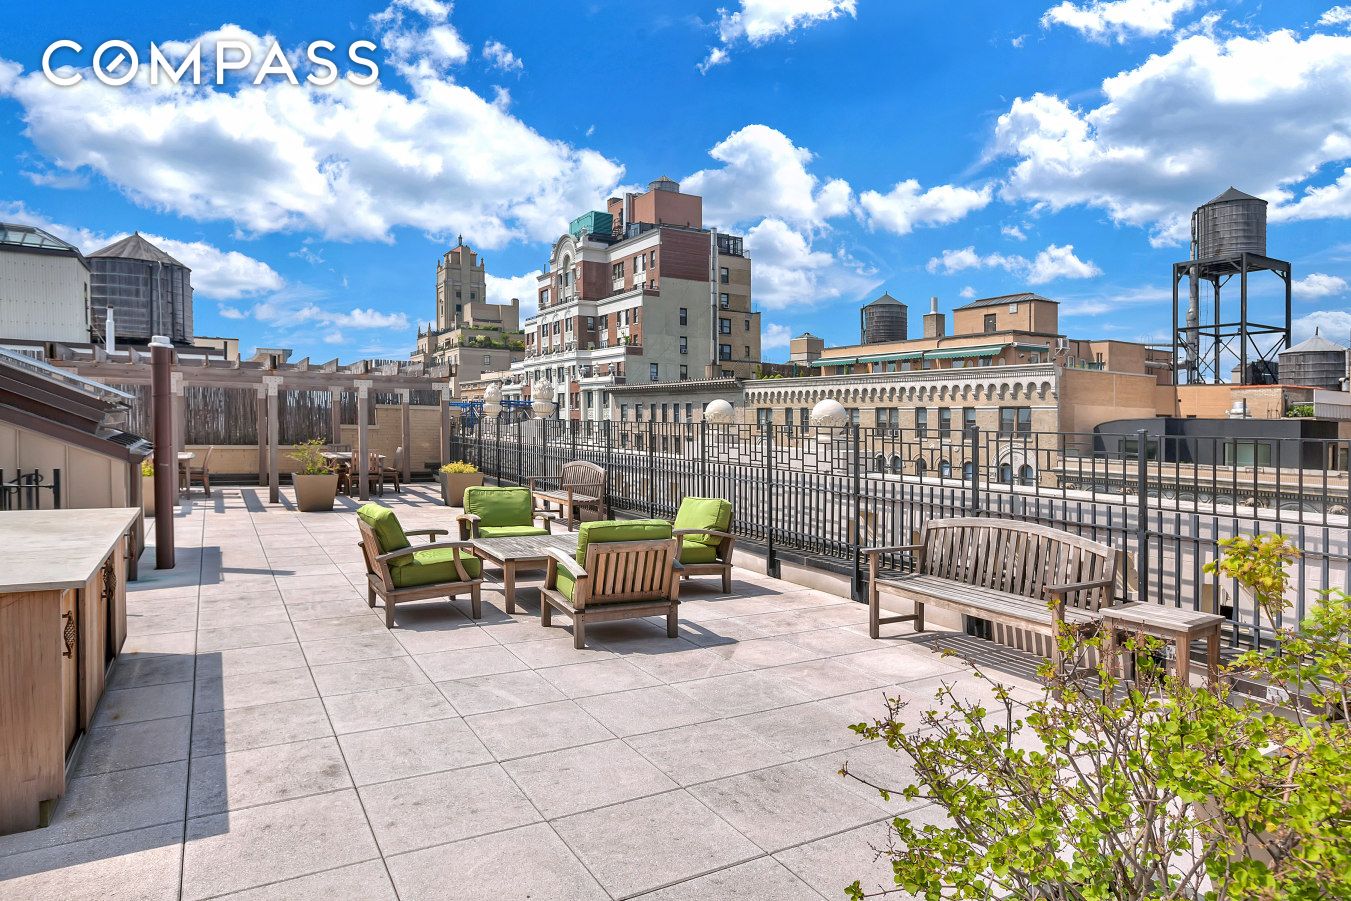 302 West 86th Street 9-C Upper West Side New York NY 10024